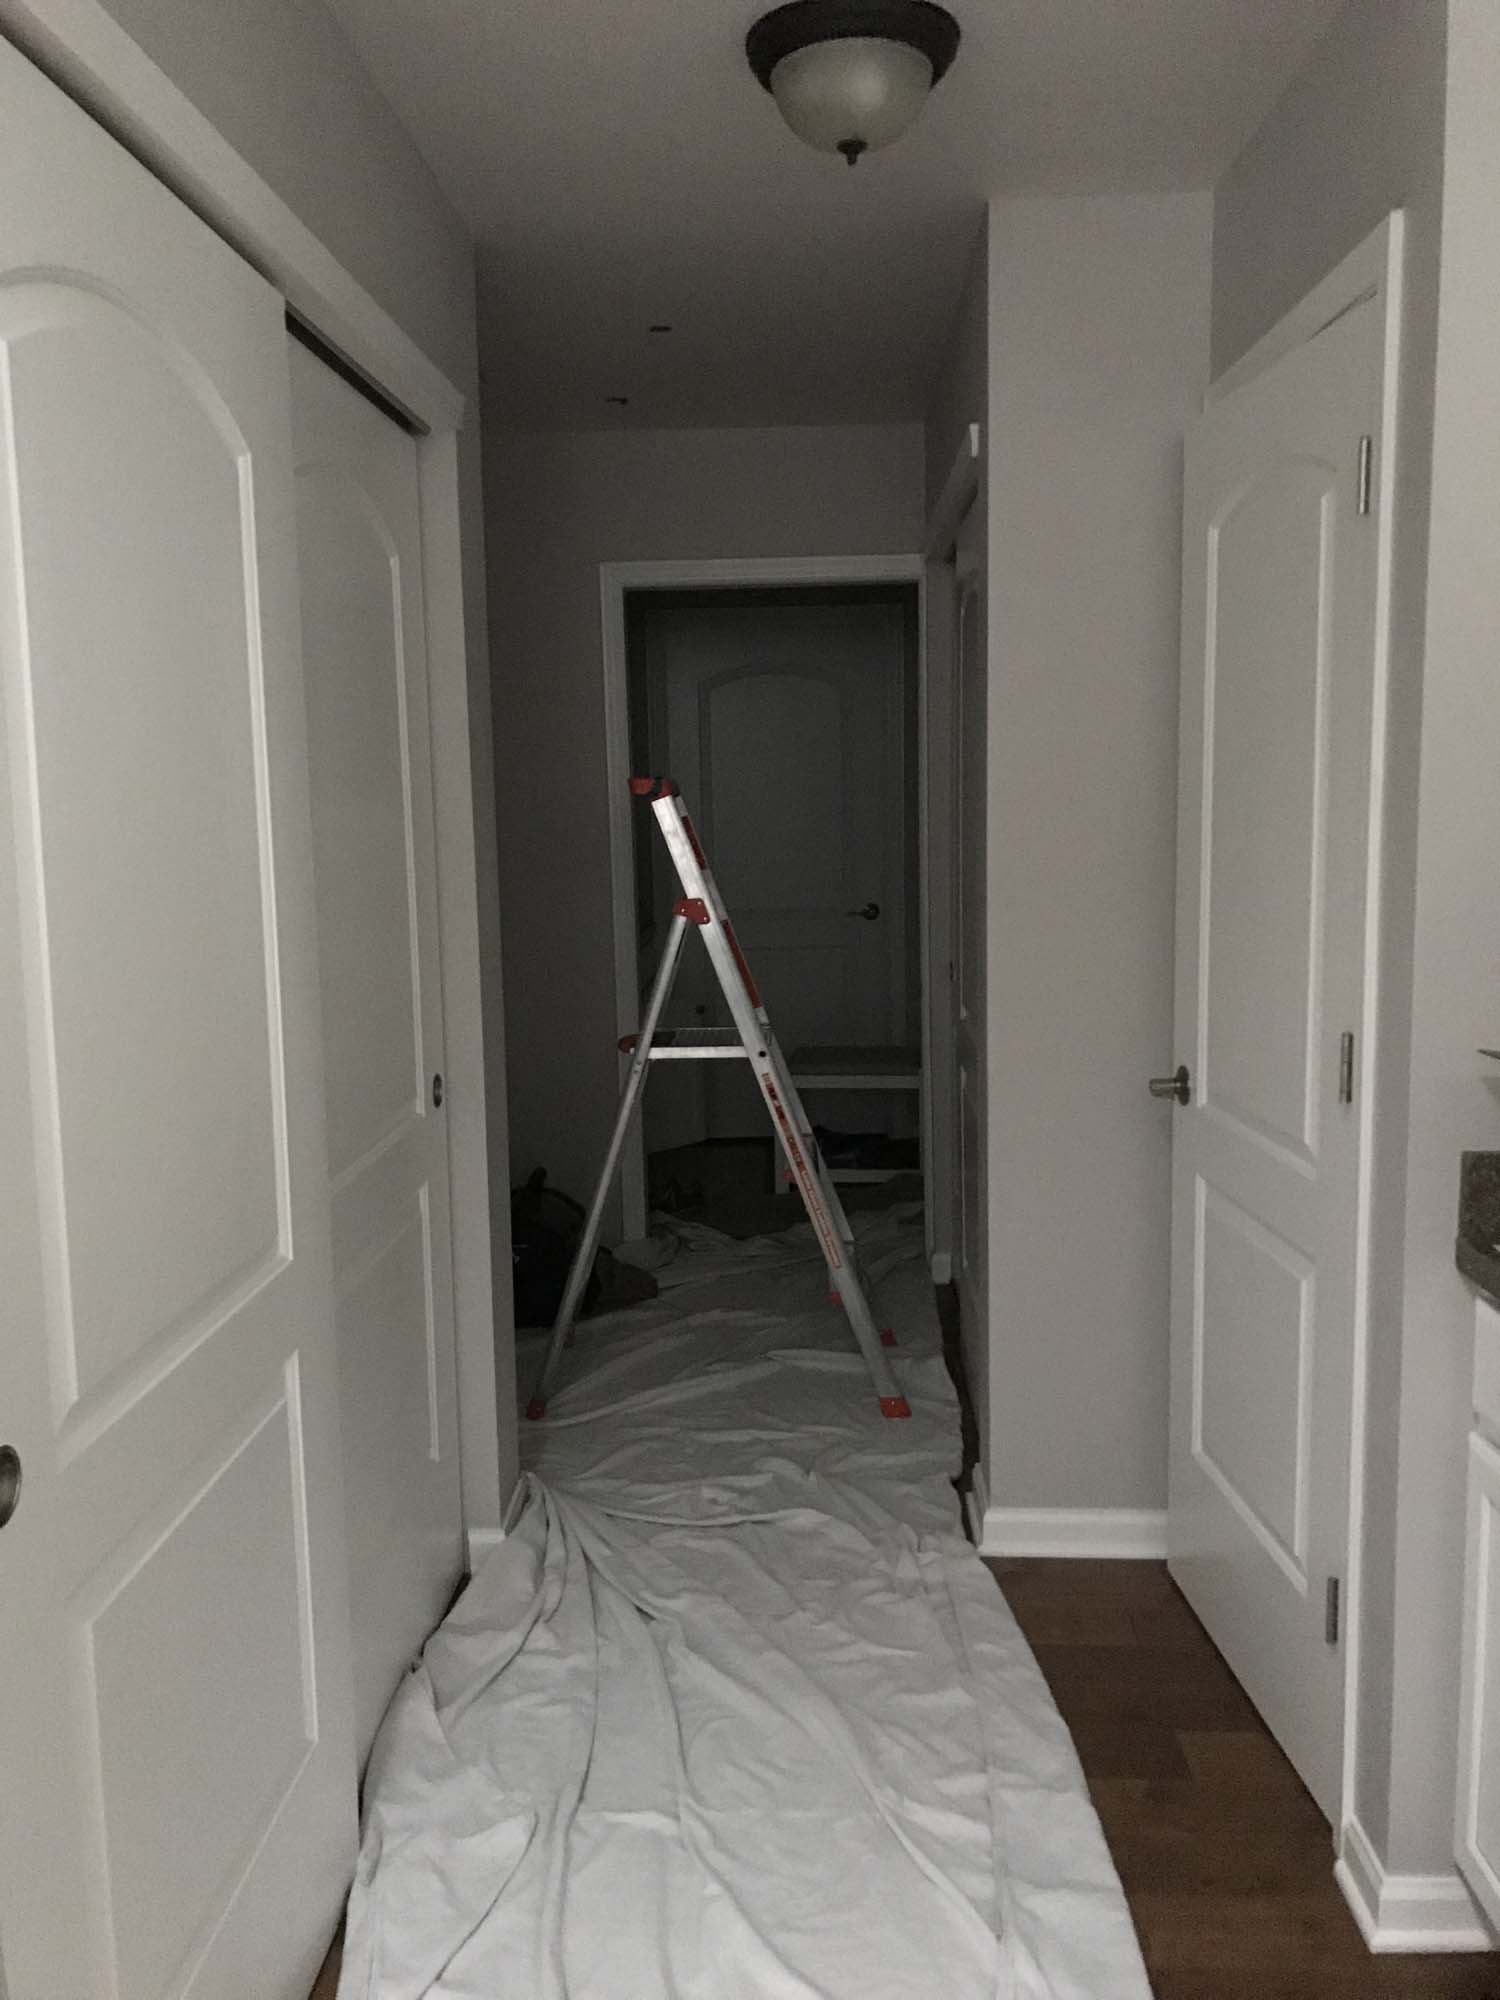 Ladder and drop-cloth sit in a home entry way before a VELUX skylight installation by Wisconsin Sunlight Solutions.